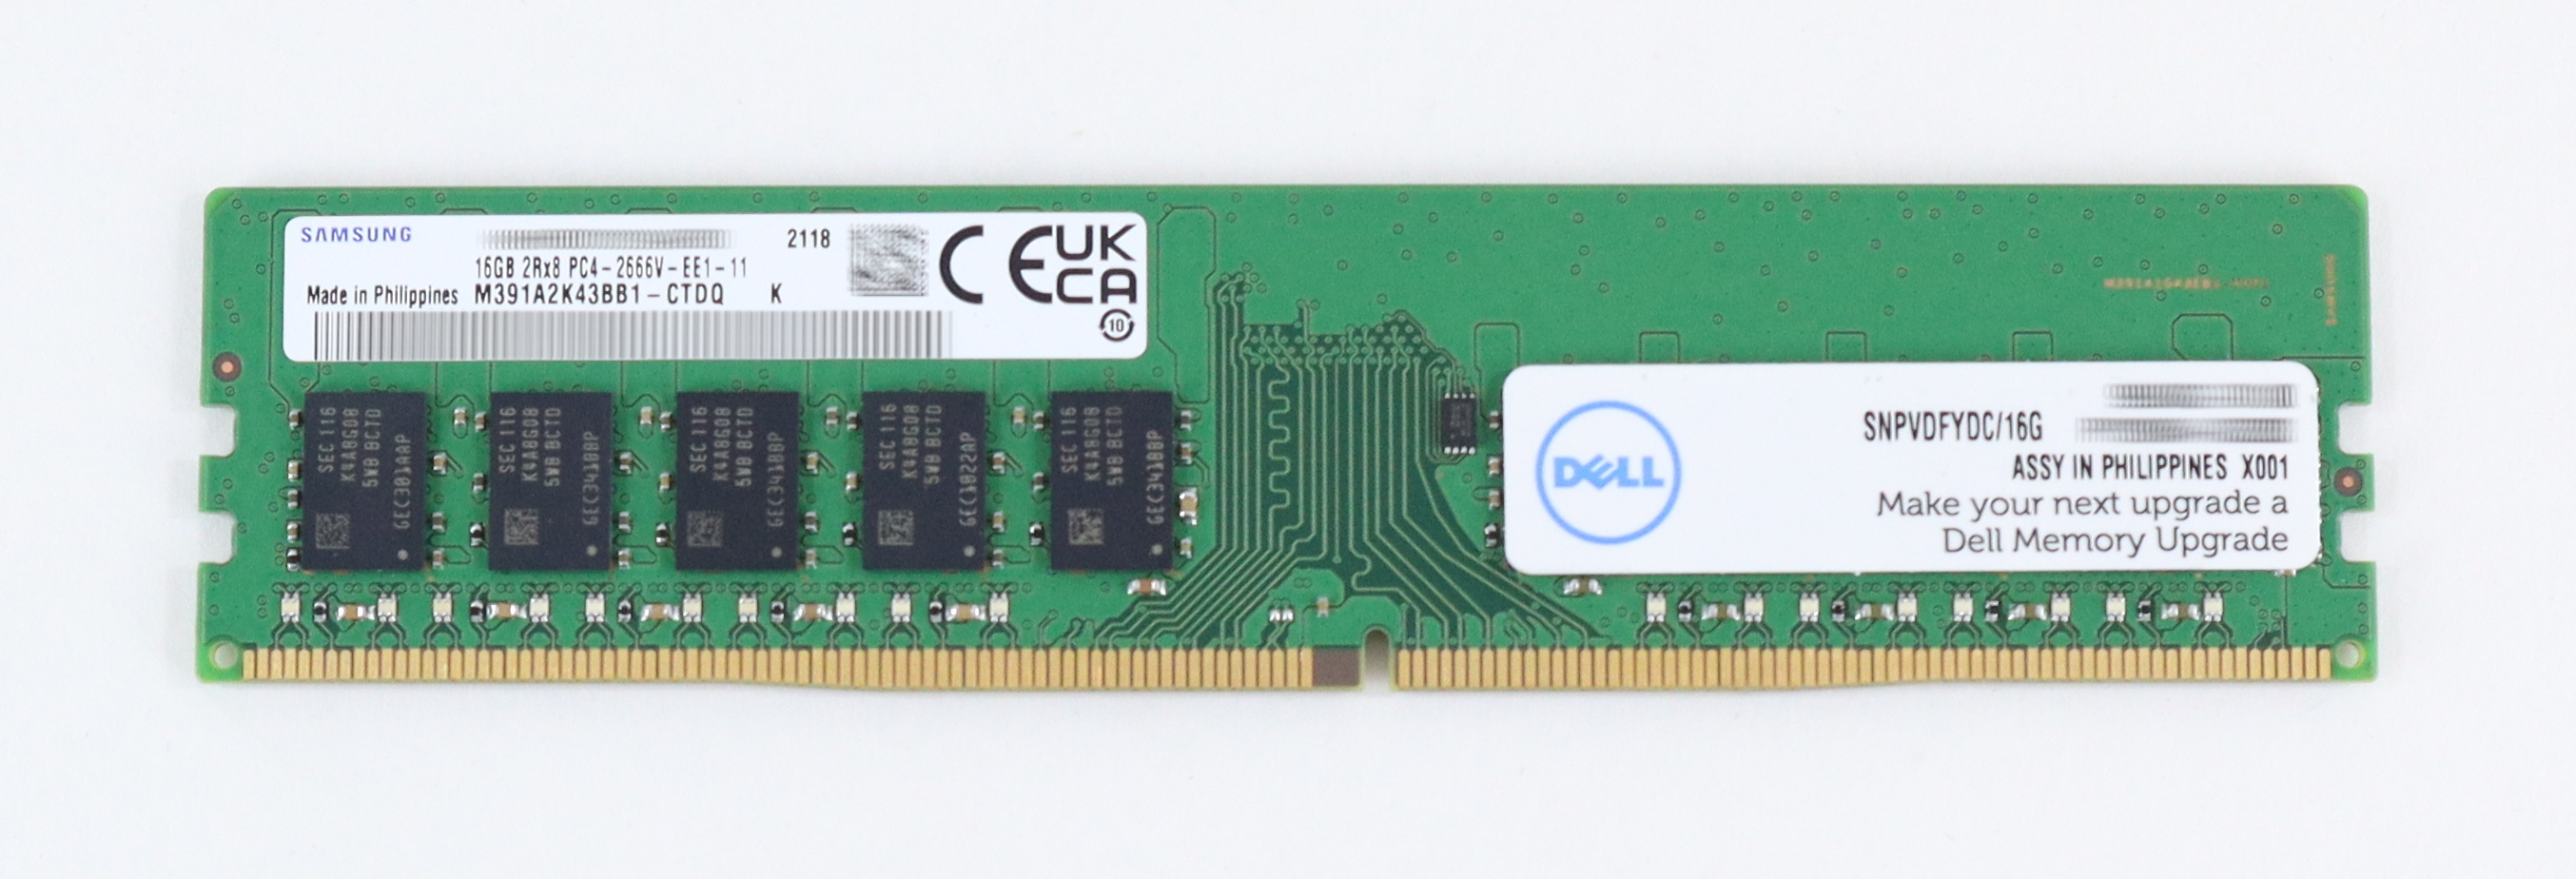 DELL 16GB 2RX8 DDR4 UDIMM Memory RAM 2666MHZ - Click Image to Close